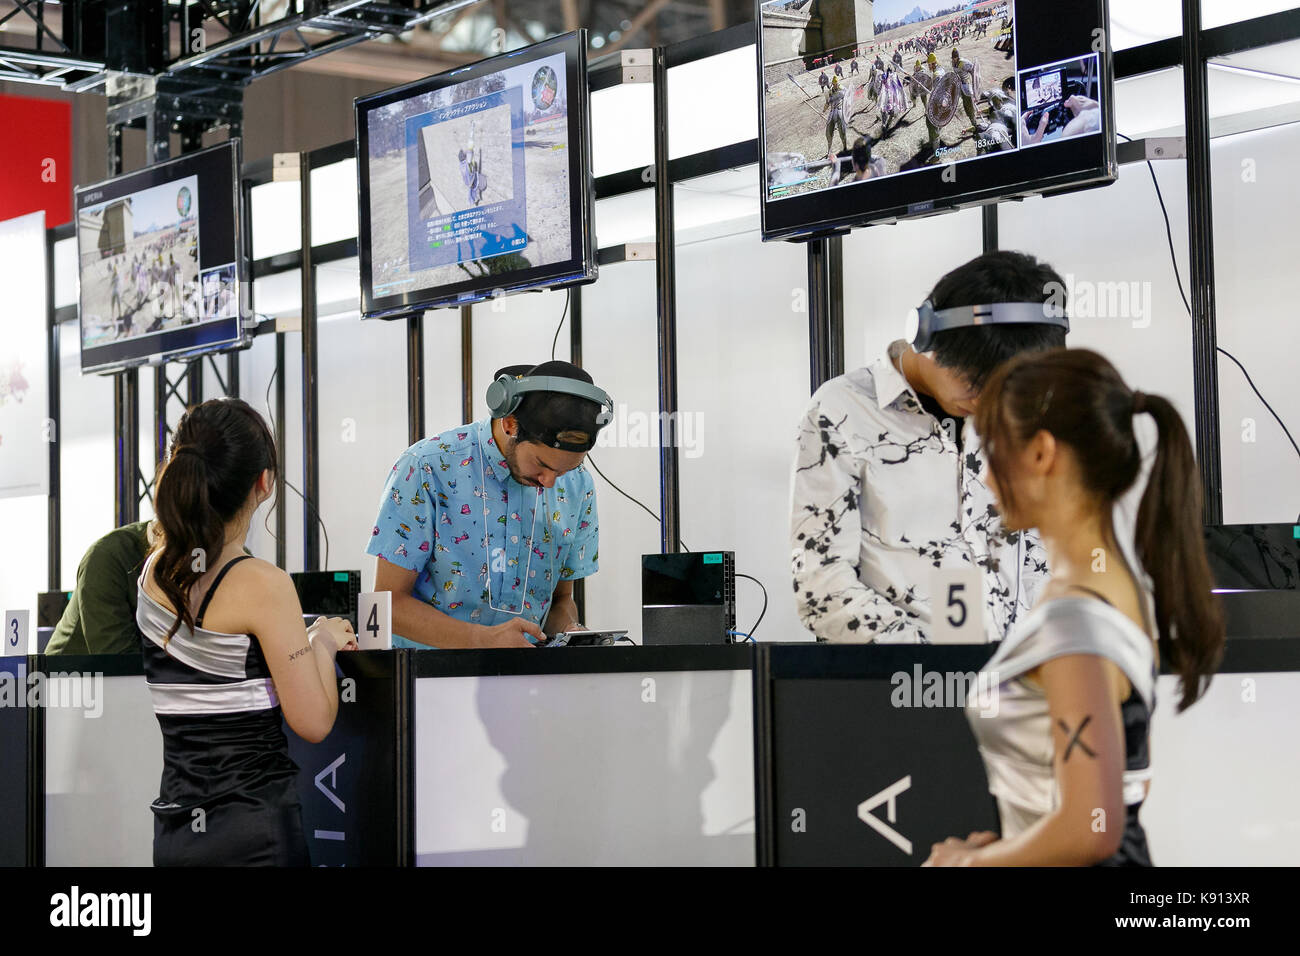 Chiba, Japan. 21st Sep, 2017. Visitors test the latest technology innovations in video game devices and platforms during the Tokyo Game Show (TGS 2017) on September 21, 2017, Chiba, Japan. This year's event hosts 609 companies from 36 different countries, introducing 1,317 video game titles for smartphones, games consoles, VR, AR and MR platforms. The show, which expects to attract 250,000 visitors, runs until September 24 at the International Convention Complex Makuhari Messe in Chiba; and will be streamed live around the world. Credit: Rodrigo Reyes Marin/AFLO/Alamy Live News Stock Photo